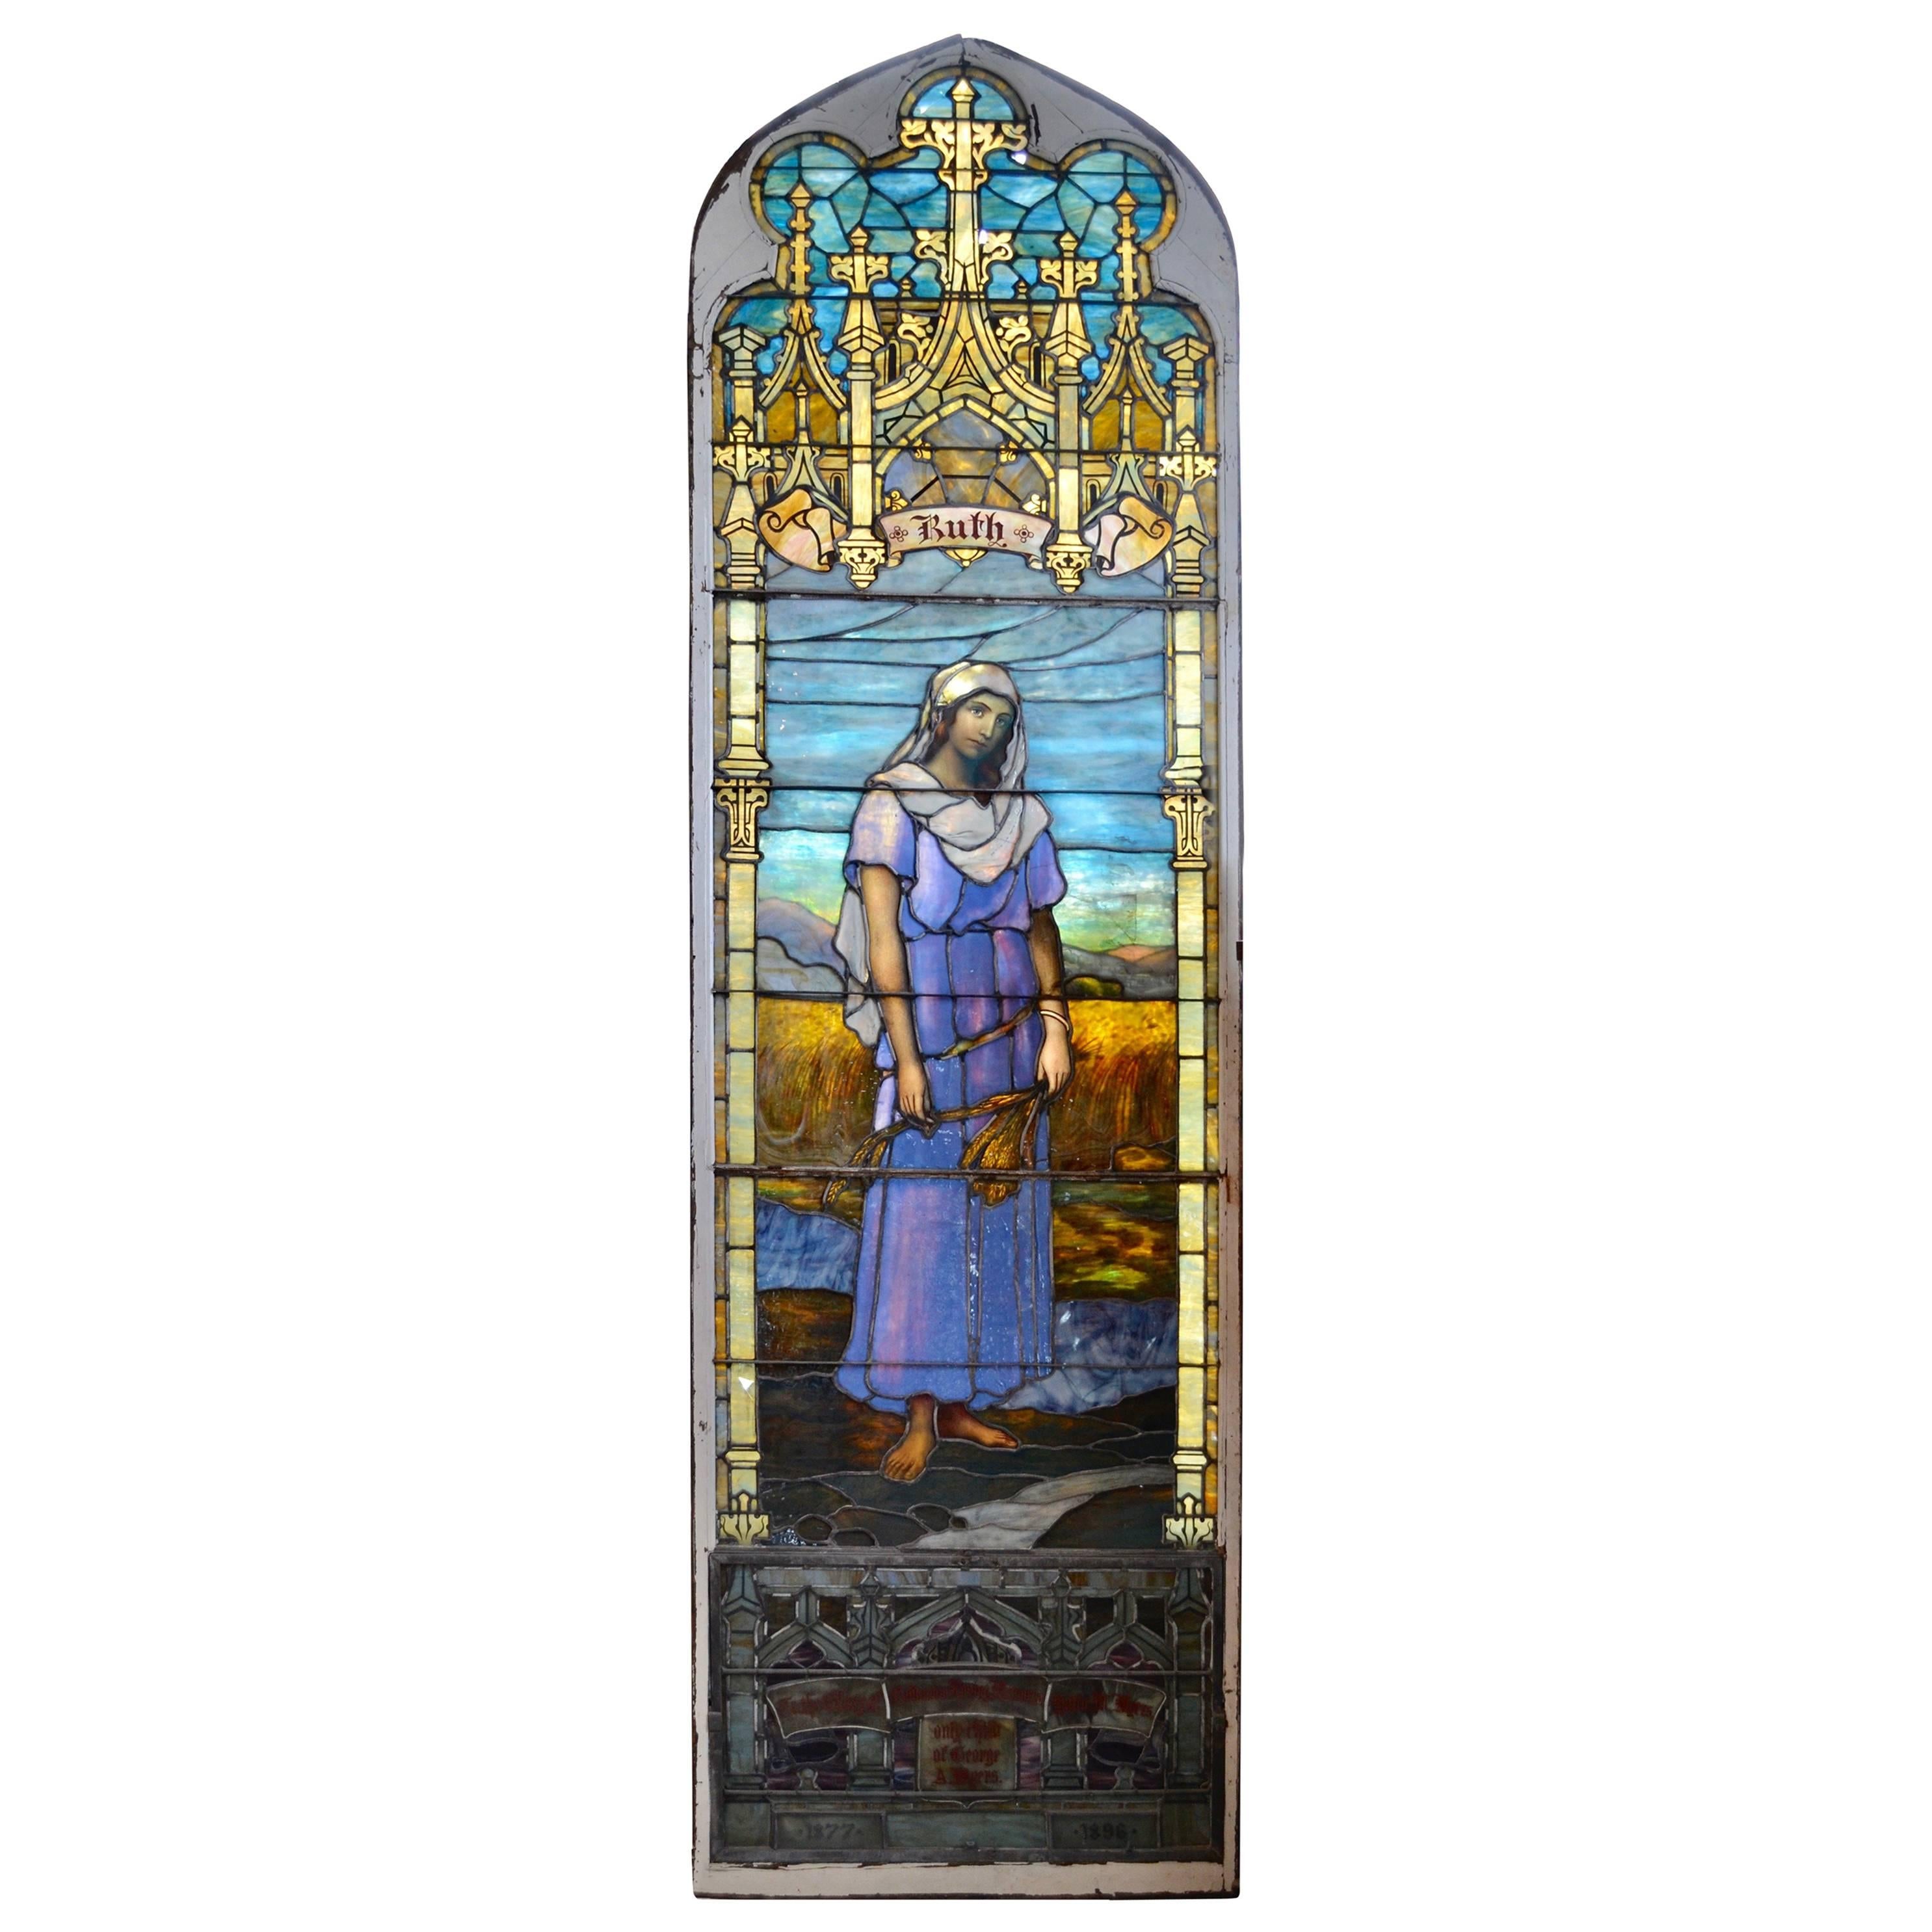 Stained Art Glass Window Depicting Ruth